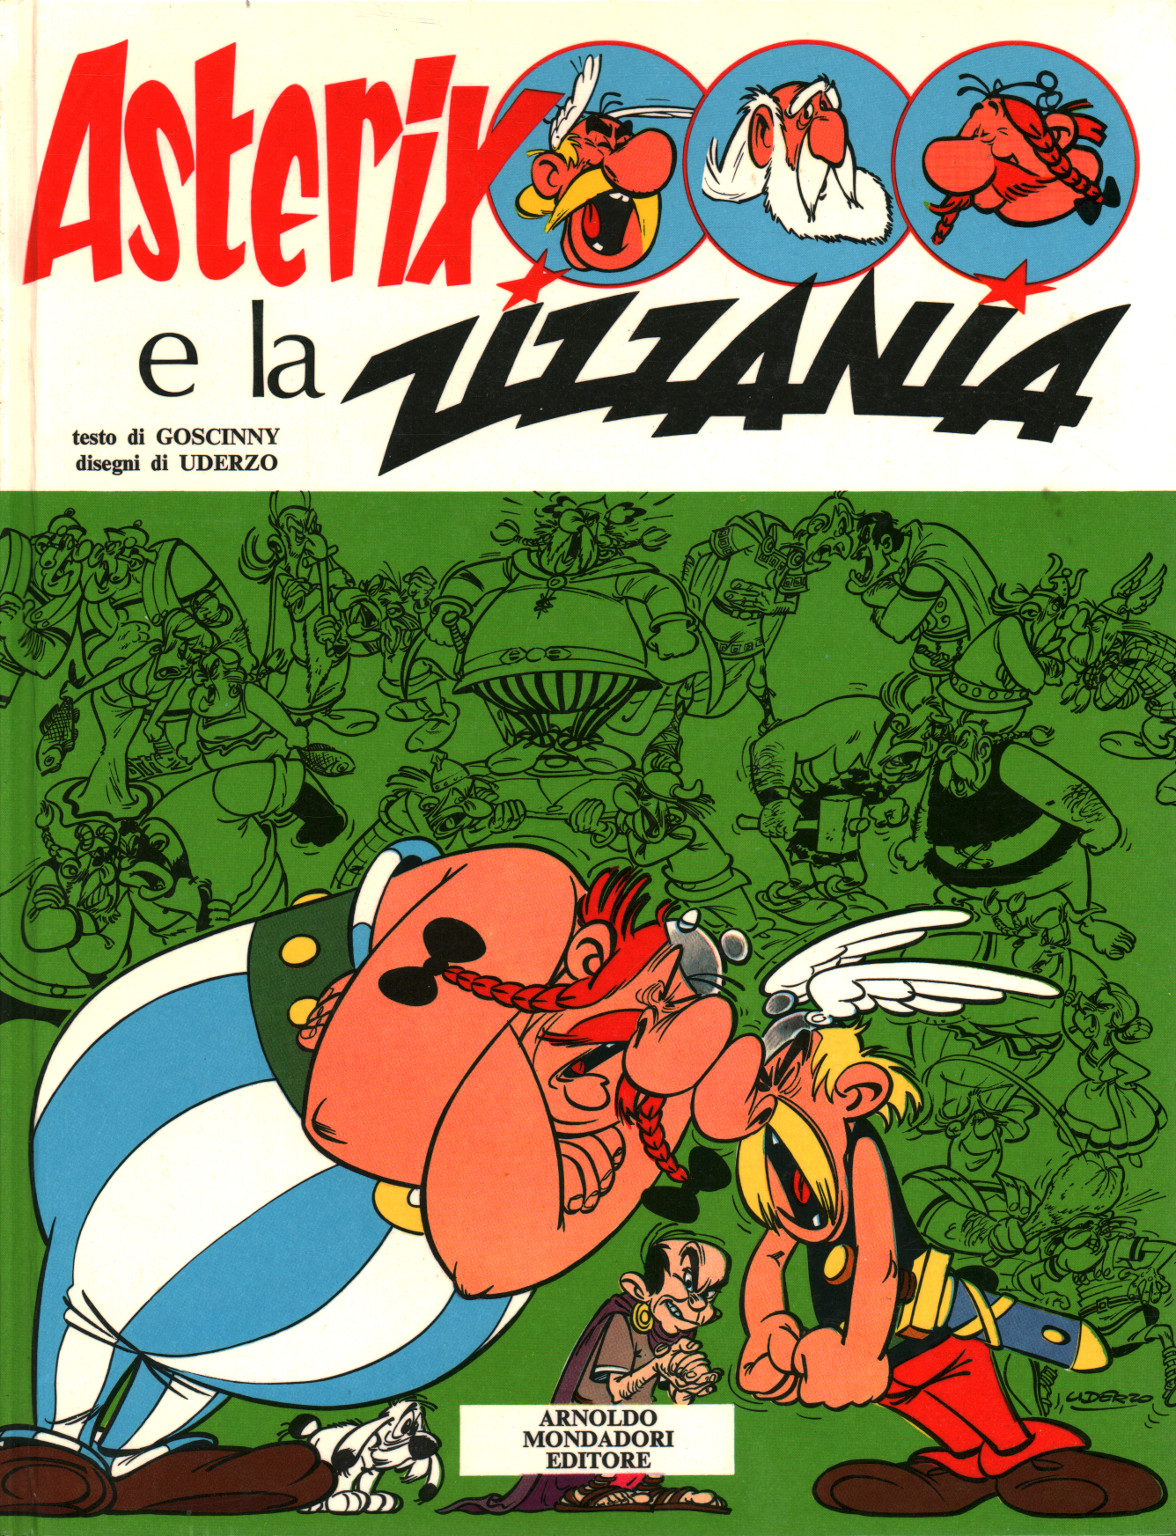 Asterix and the weeds, s.a.